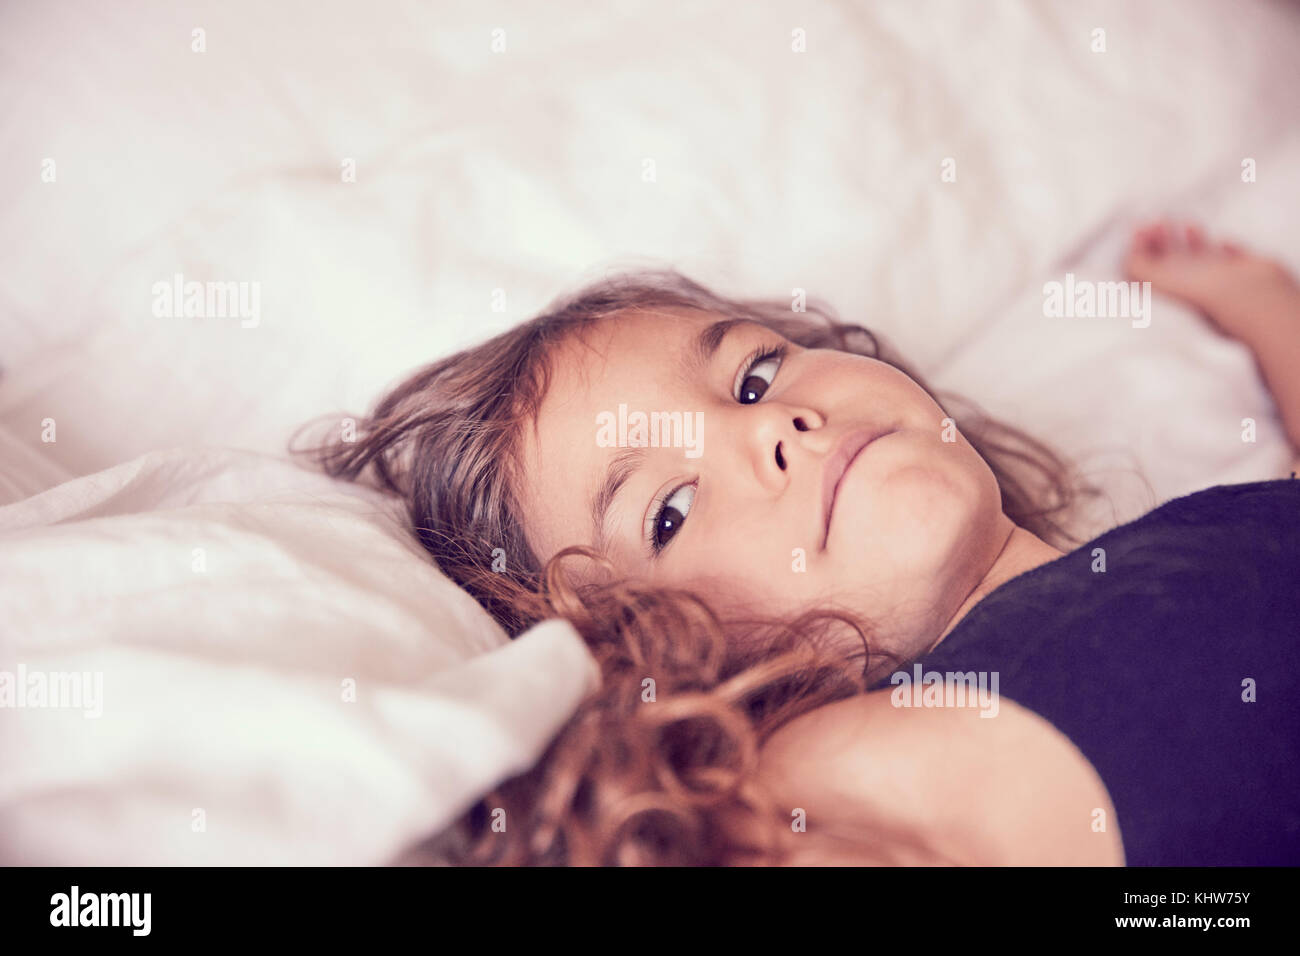 Young girl lying on bed, pensive expressions Stock Photo